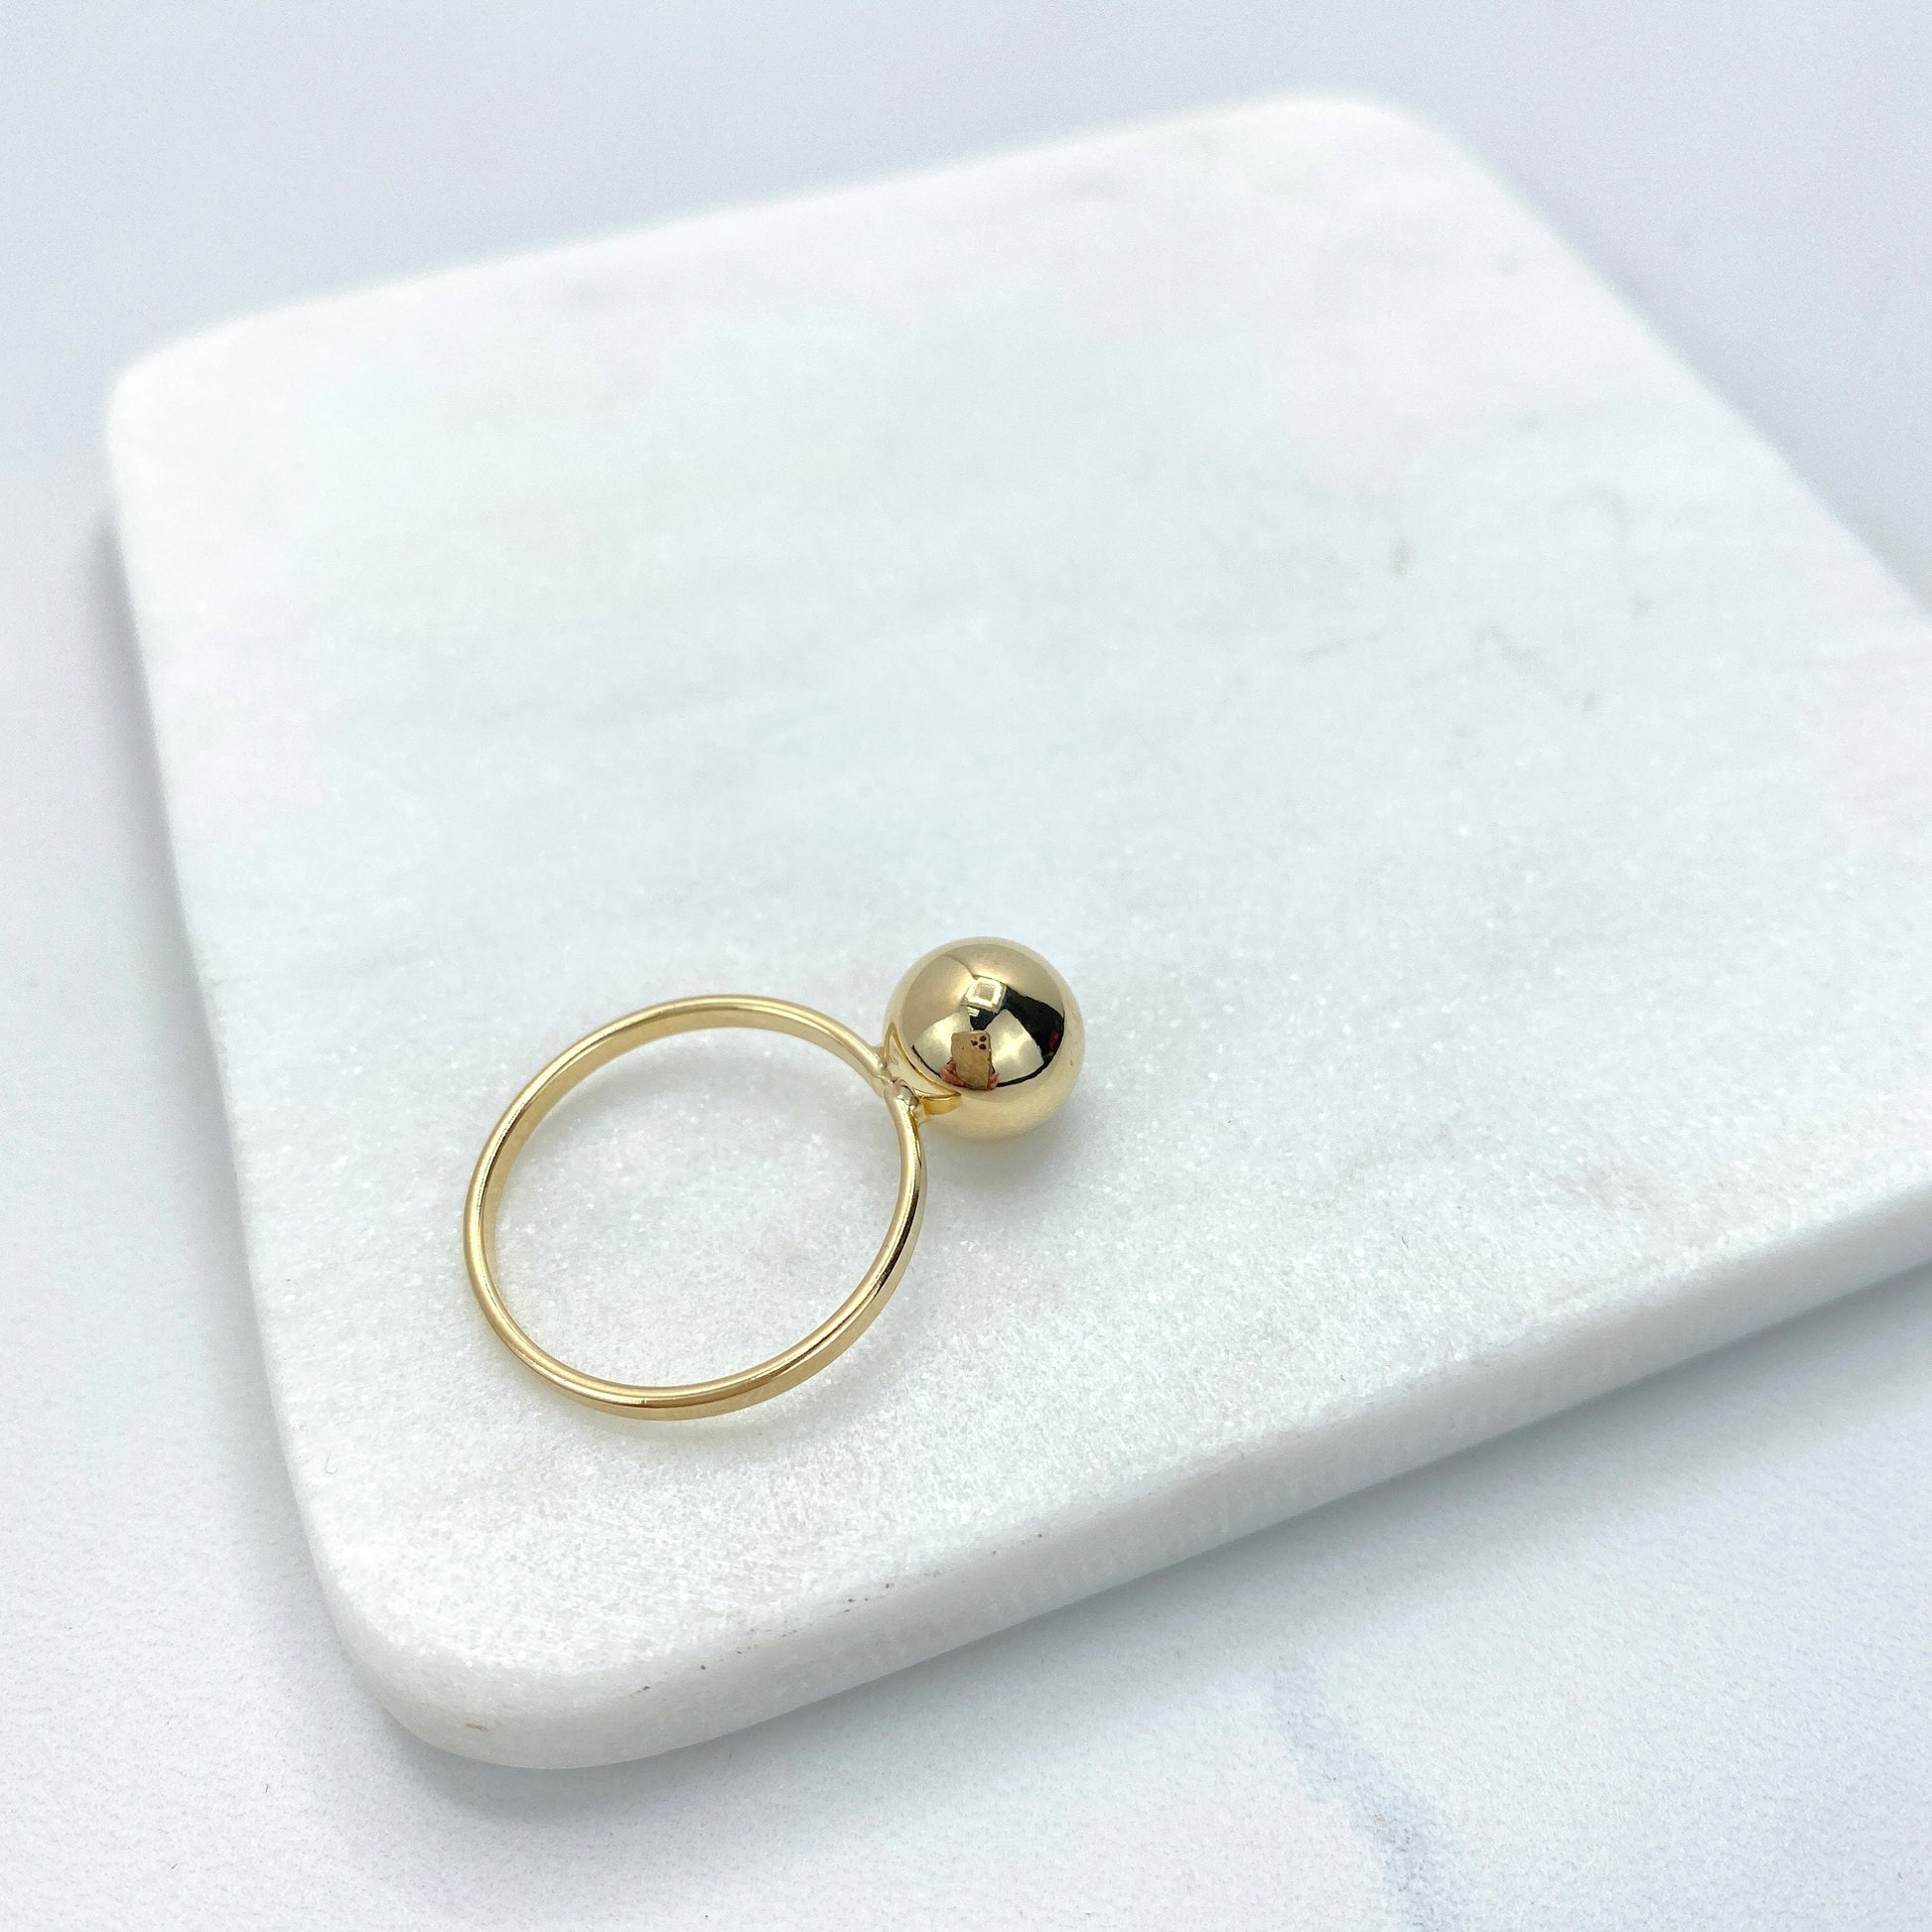 18k Gold Filled Solitaire Medium Ball Ring Wholesale and Jewelry Making Supplies